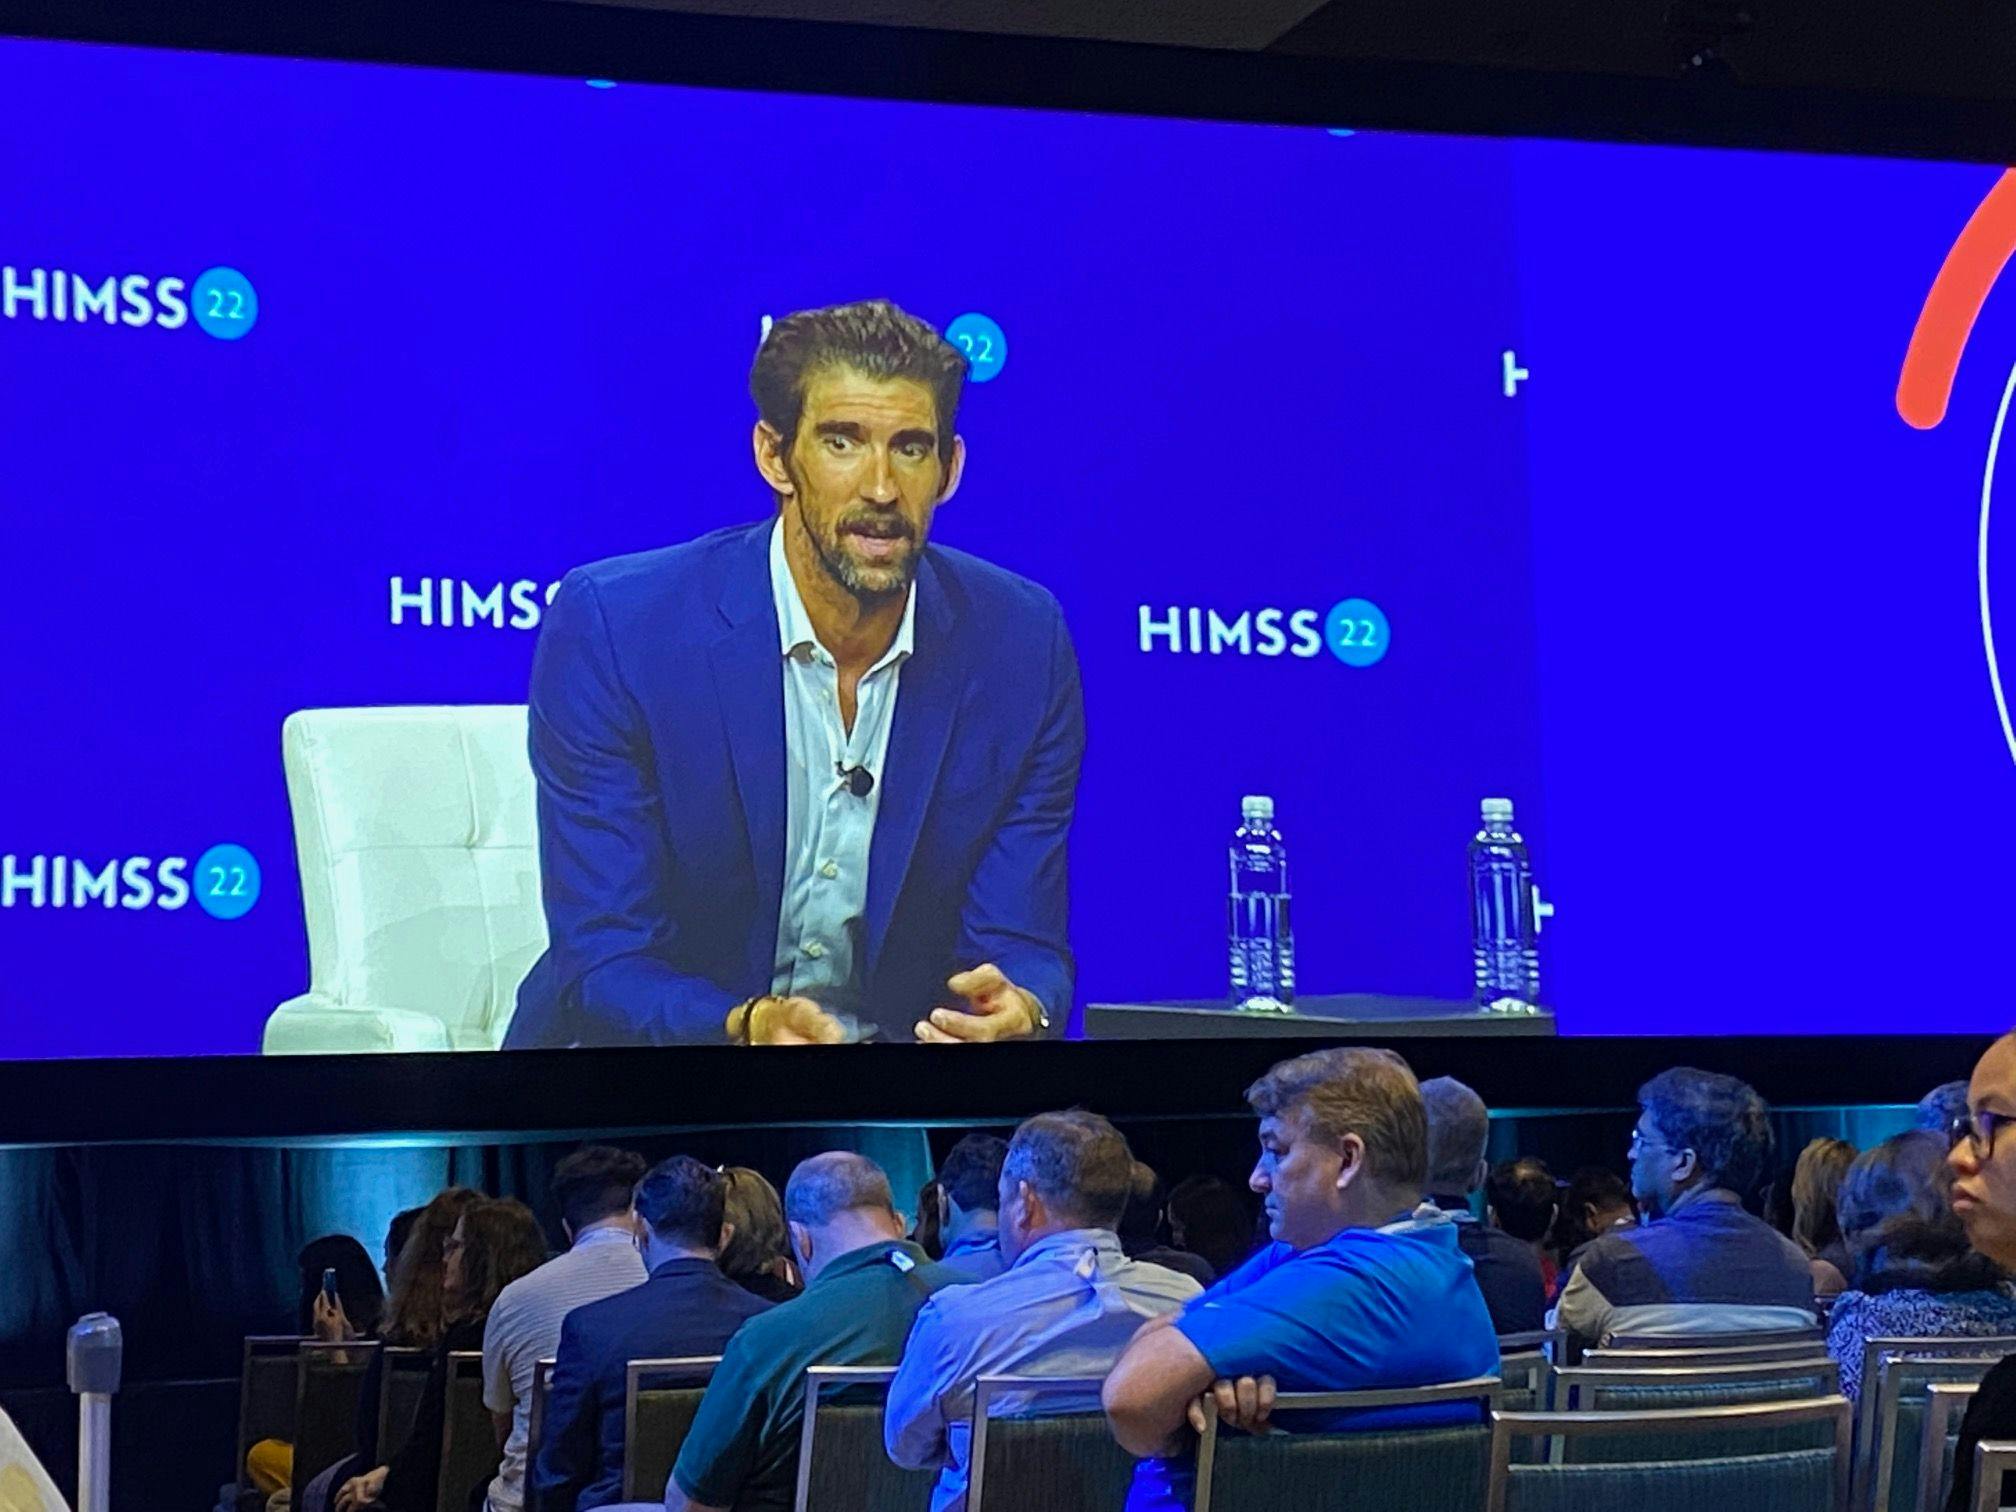 Michael Phelps discussed his mental health advocacy, and his personal struggles, at the HIMSS Conference Friday.